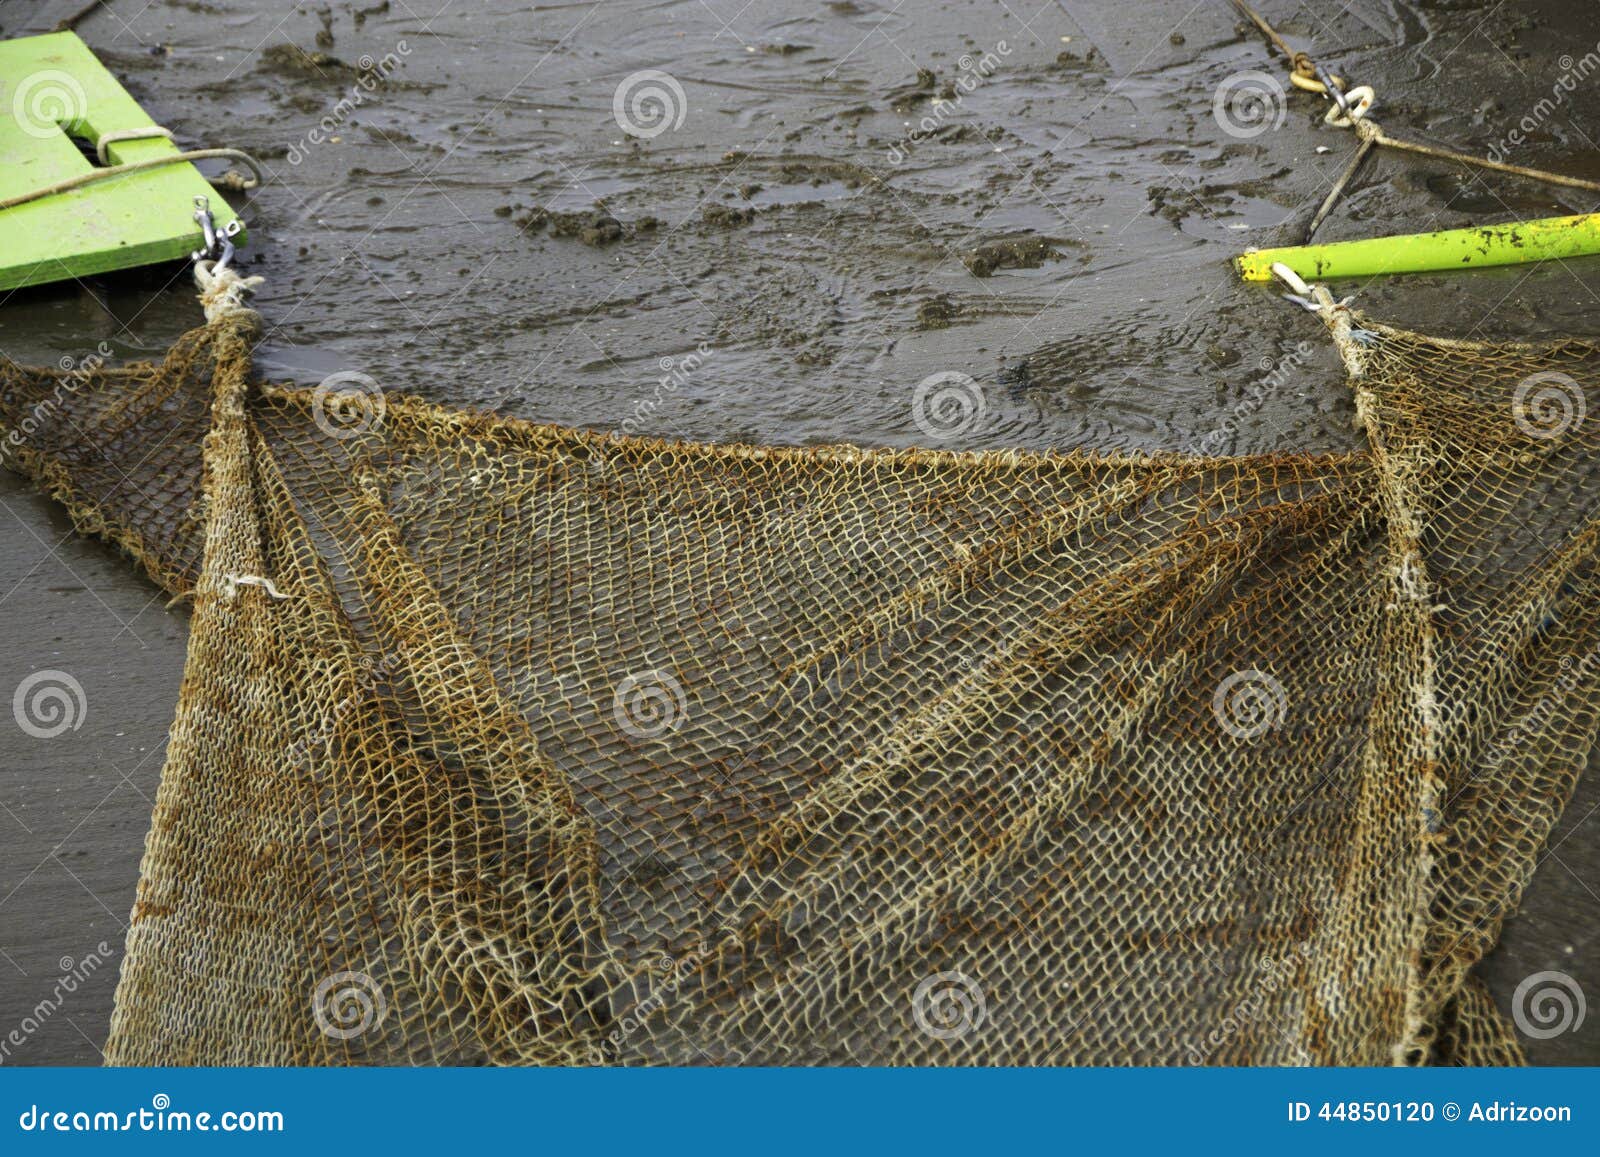 Dragnet for fishing stock photo. Image of fishing, rope - 44850120